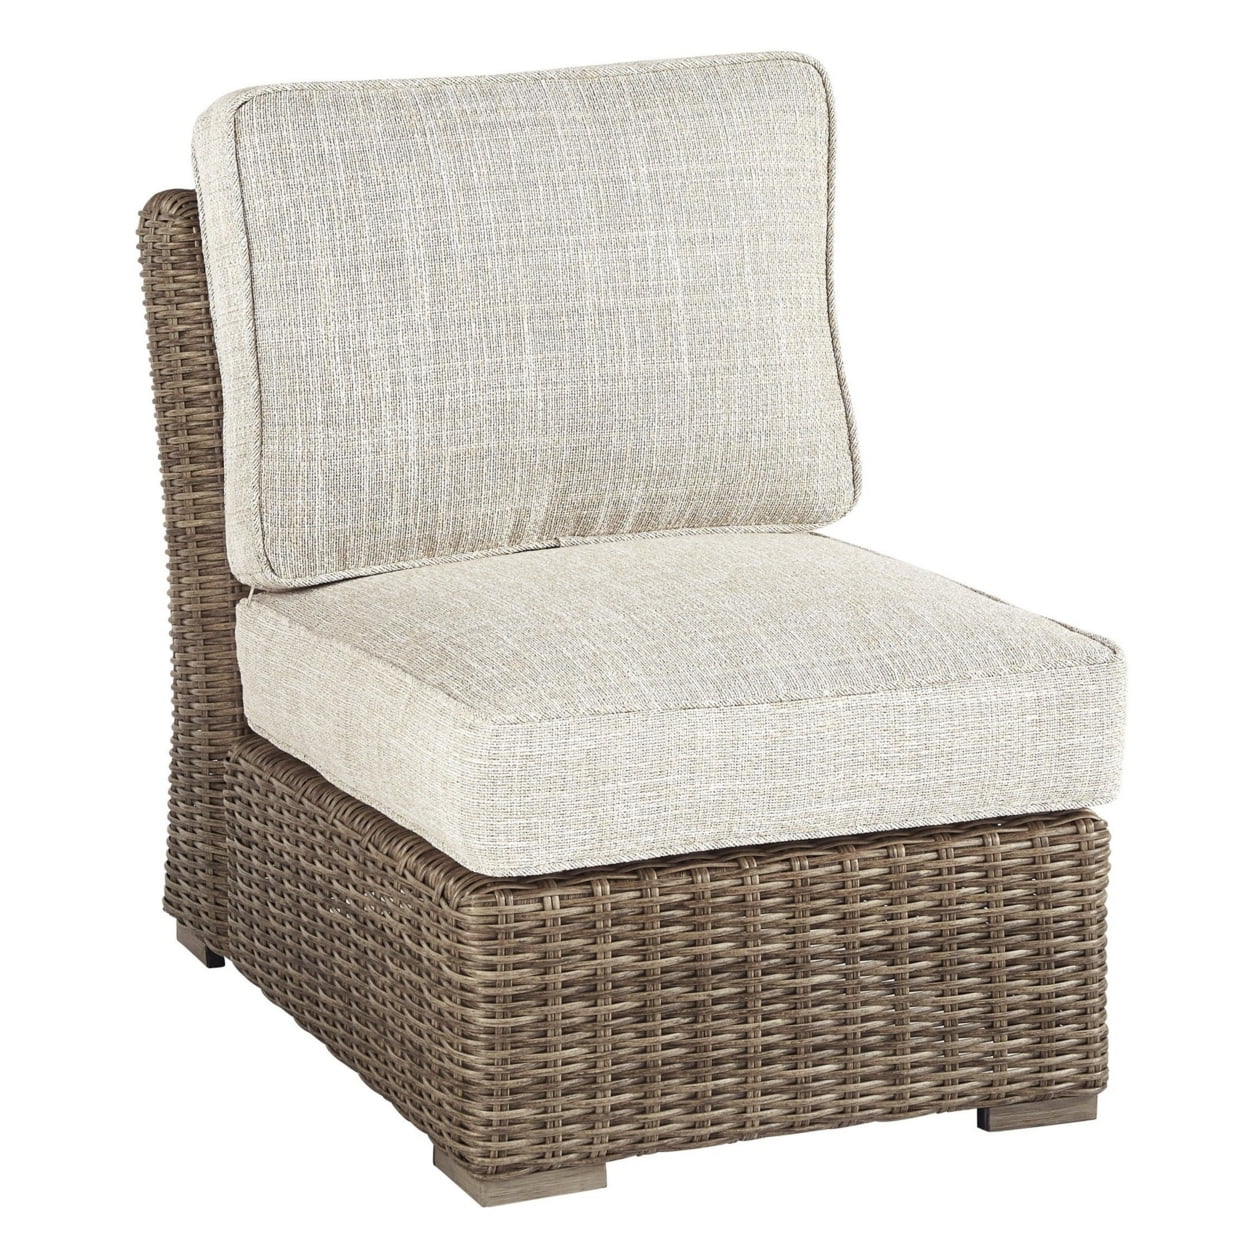 Picture of Benjara BM213380 Handwoven Wicker Frame Fabric Upholstered Armless Chair - Beige & Brown - 36.5 x 24.25 x 38 in.